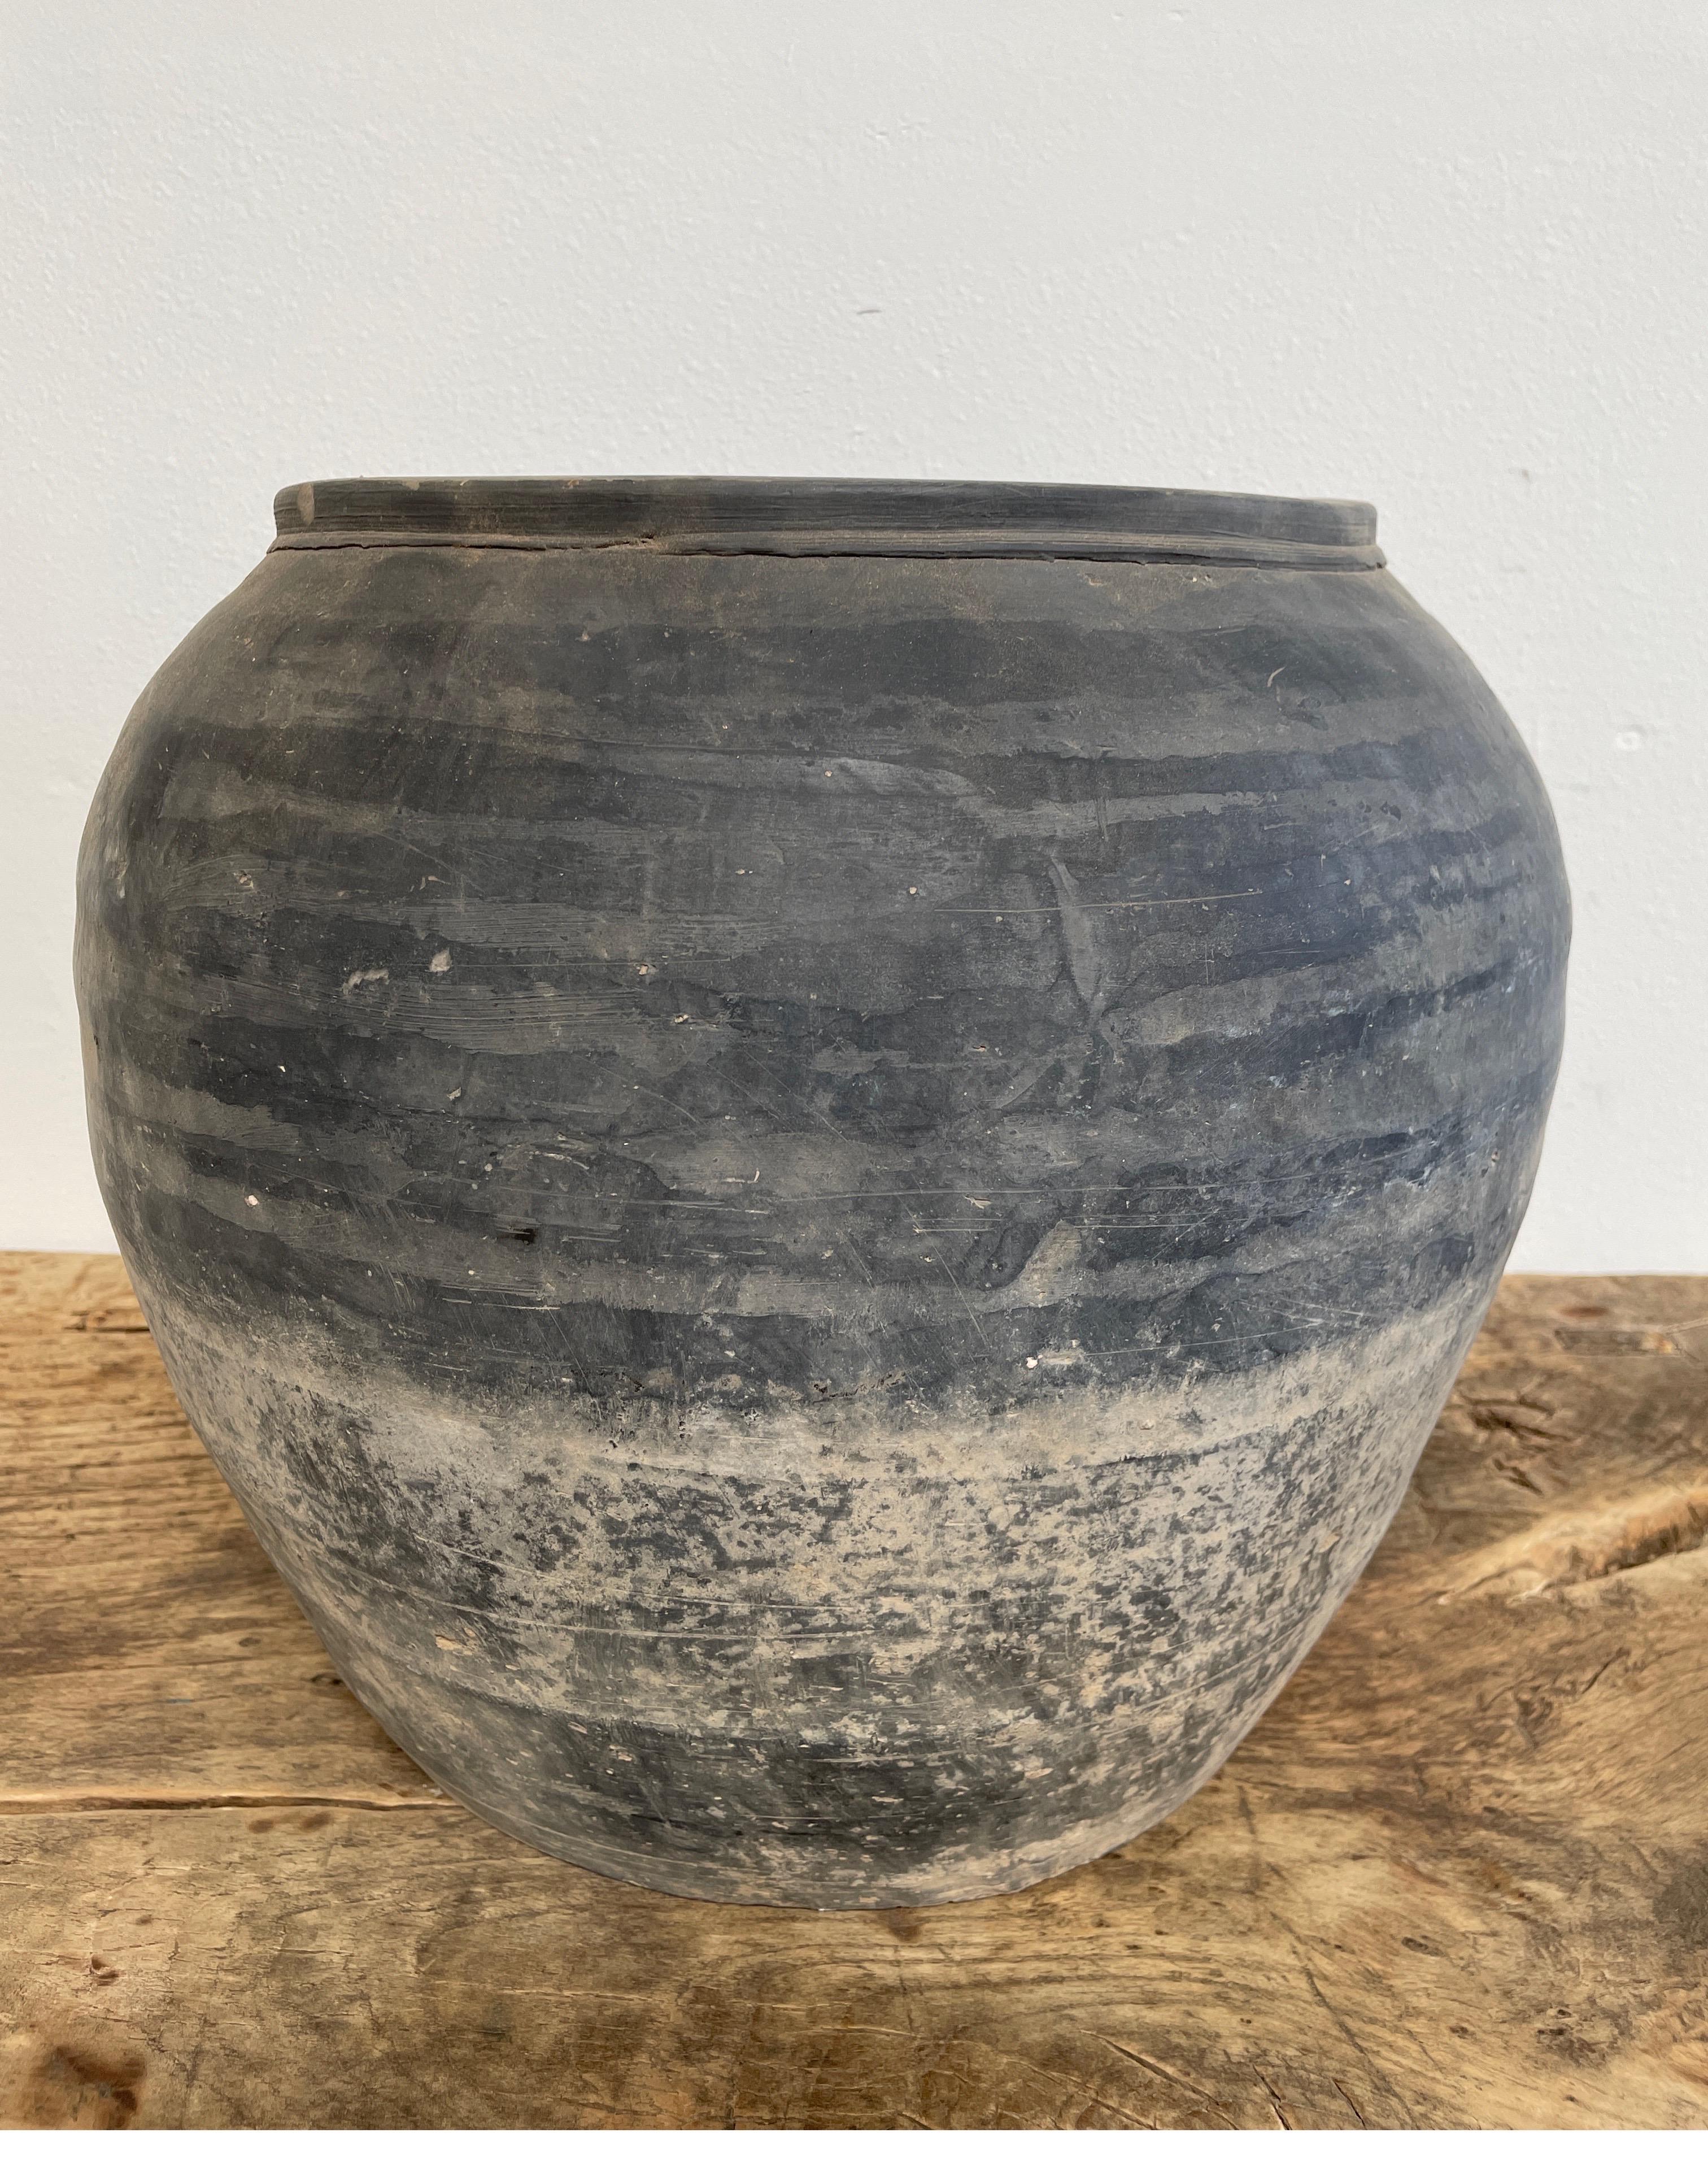 Vintage pottery

Beautiful and rich in character, this vintage oil pot adds just the right amount of texture + warmth where you need it. Stunning faded black/ brown unglazed finish with warm terra-cotta accents.
Some have a more faded appearance